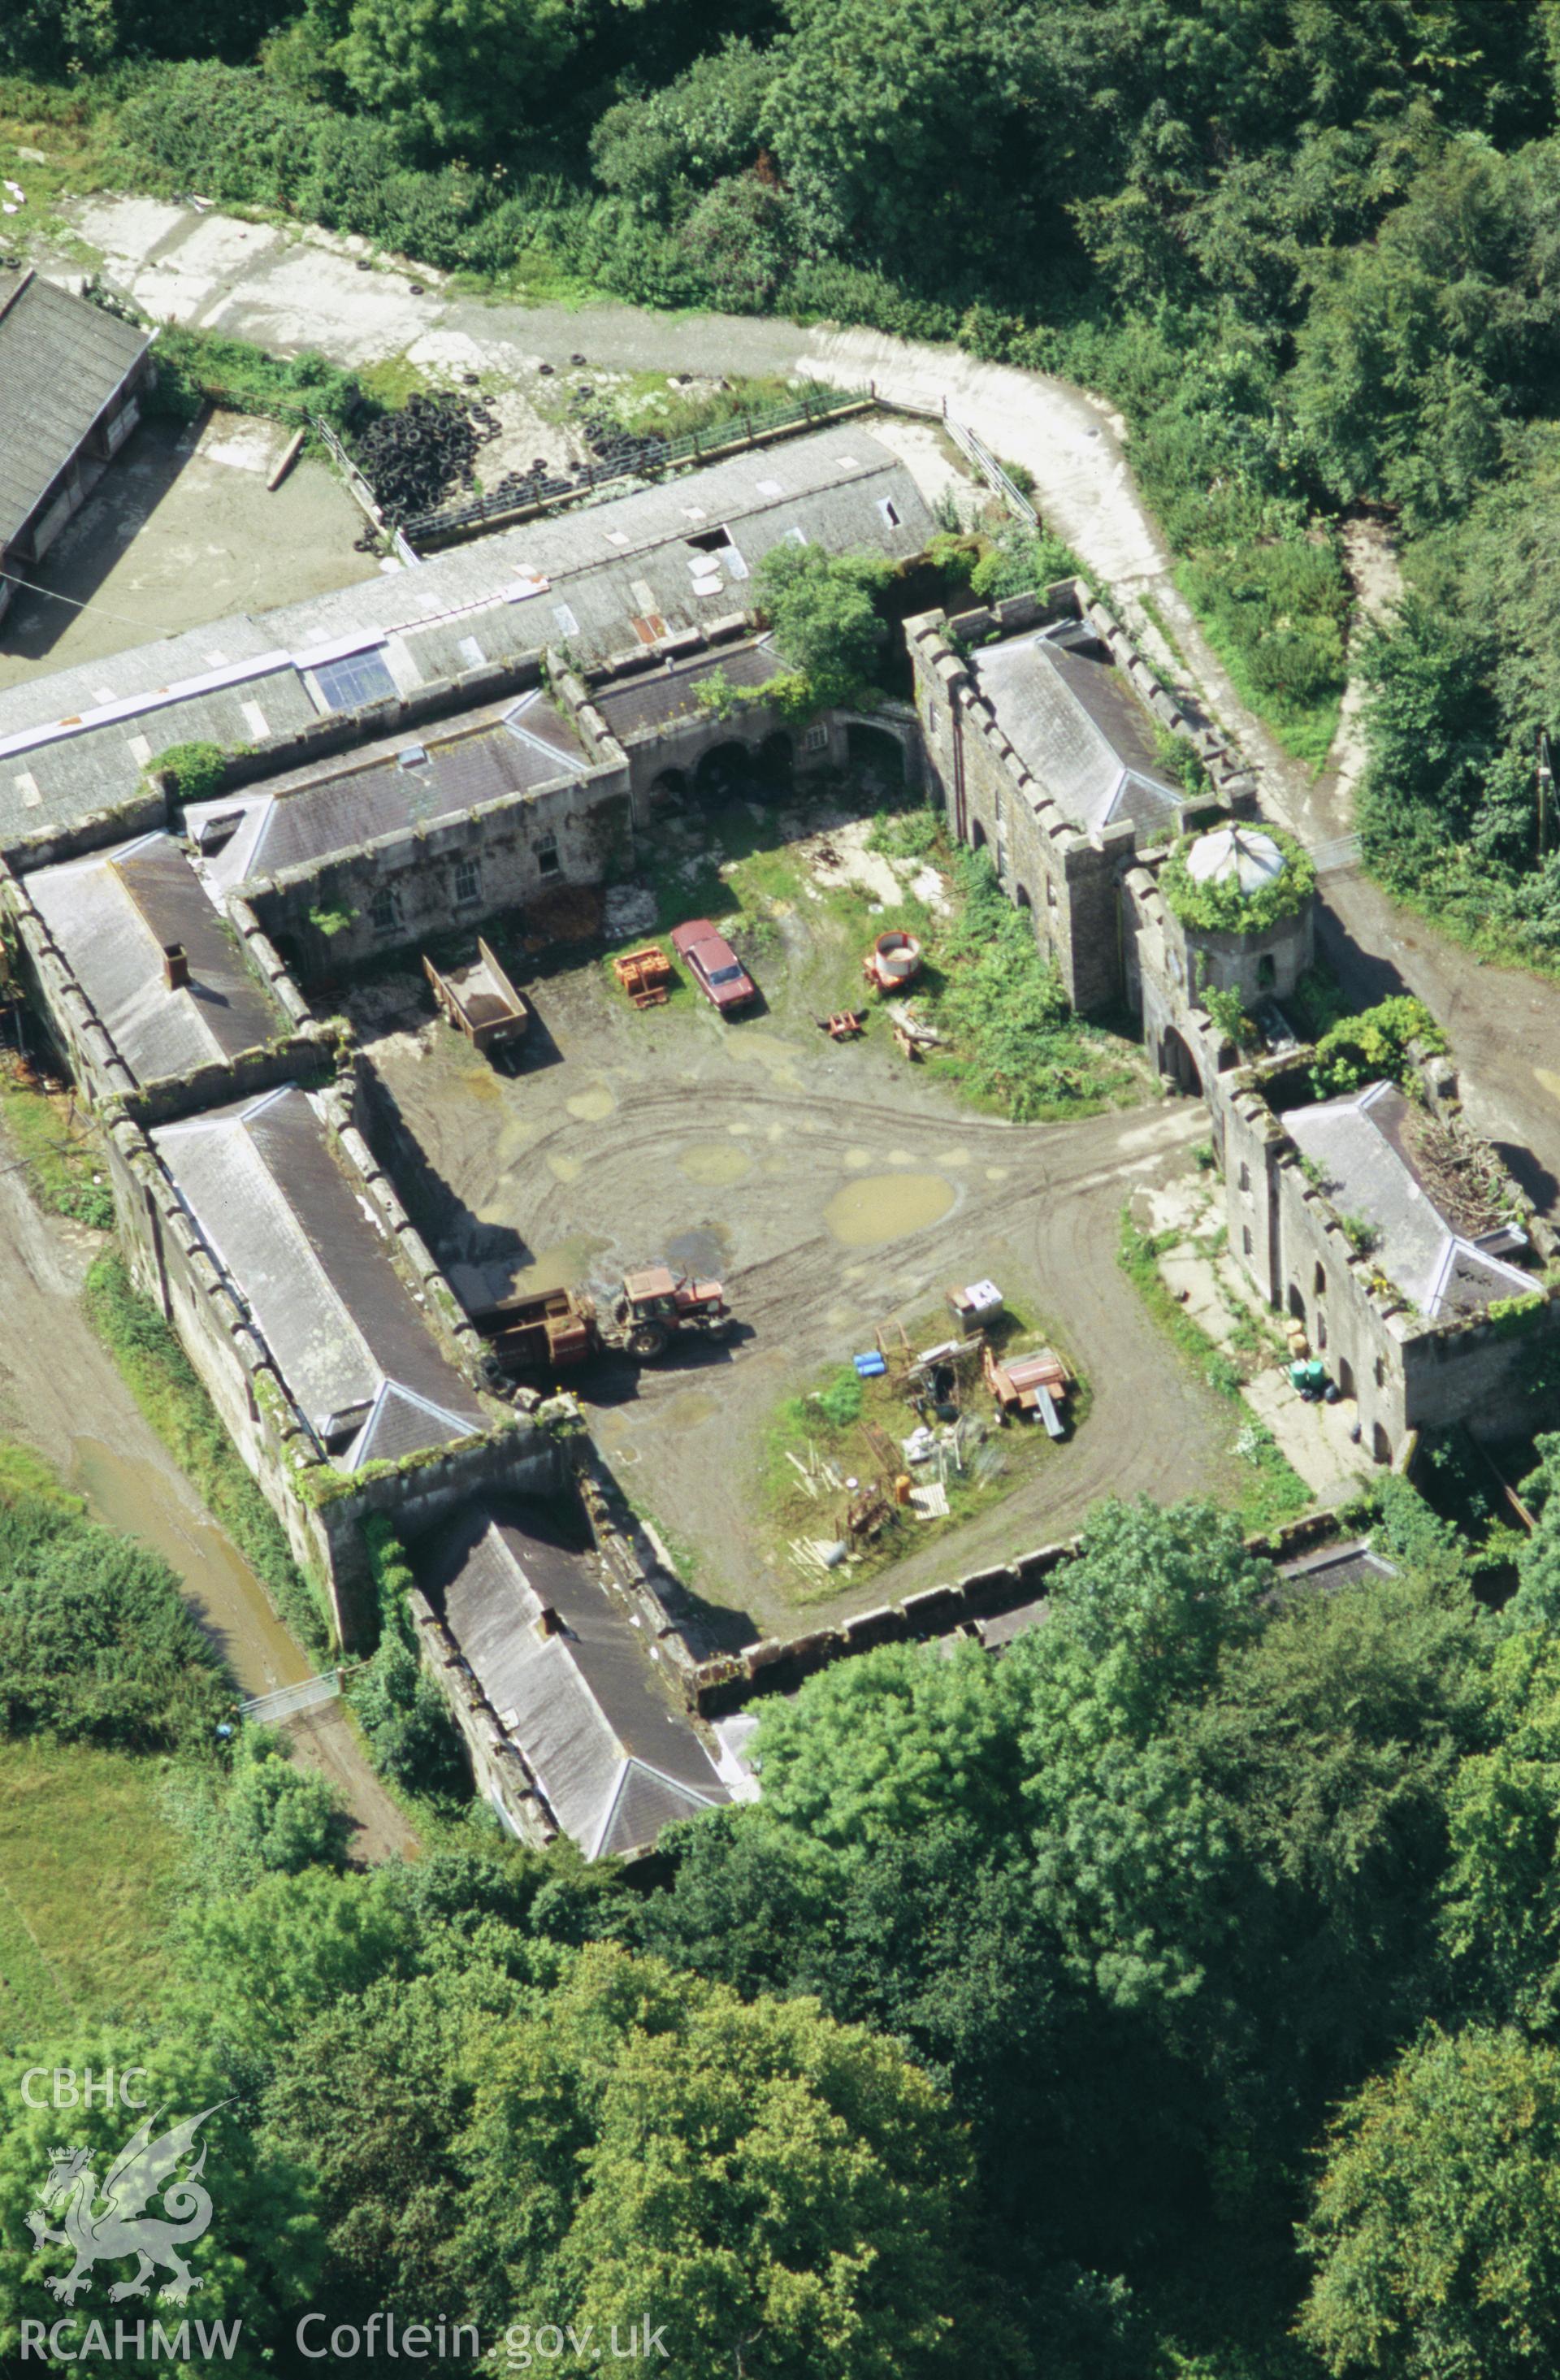 Slide of RCAHMW colour oblique aerial photograph of New Stable Court, Picton Castle, taken by Toby Driver, 2004.